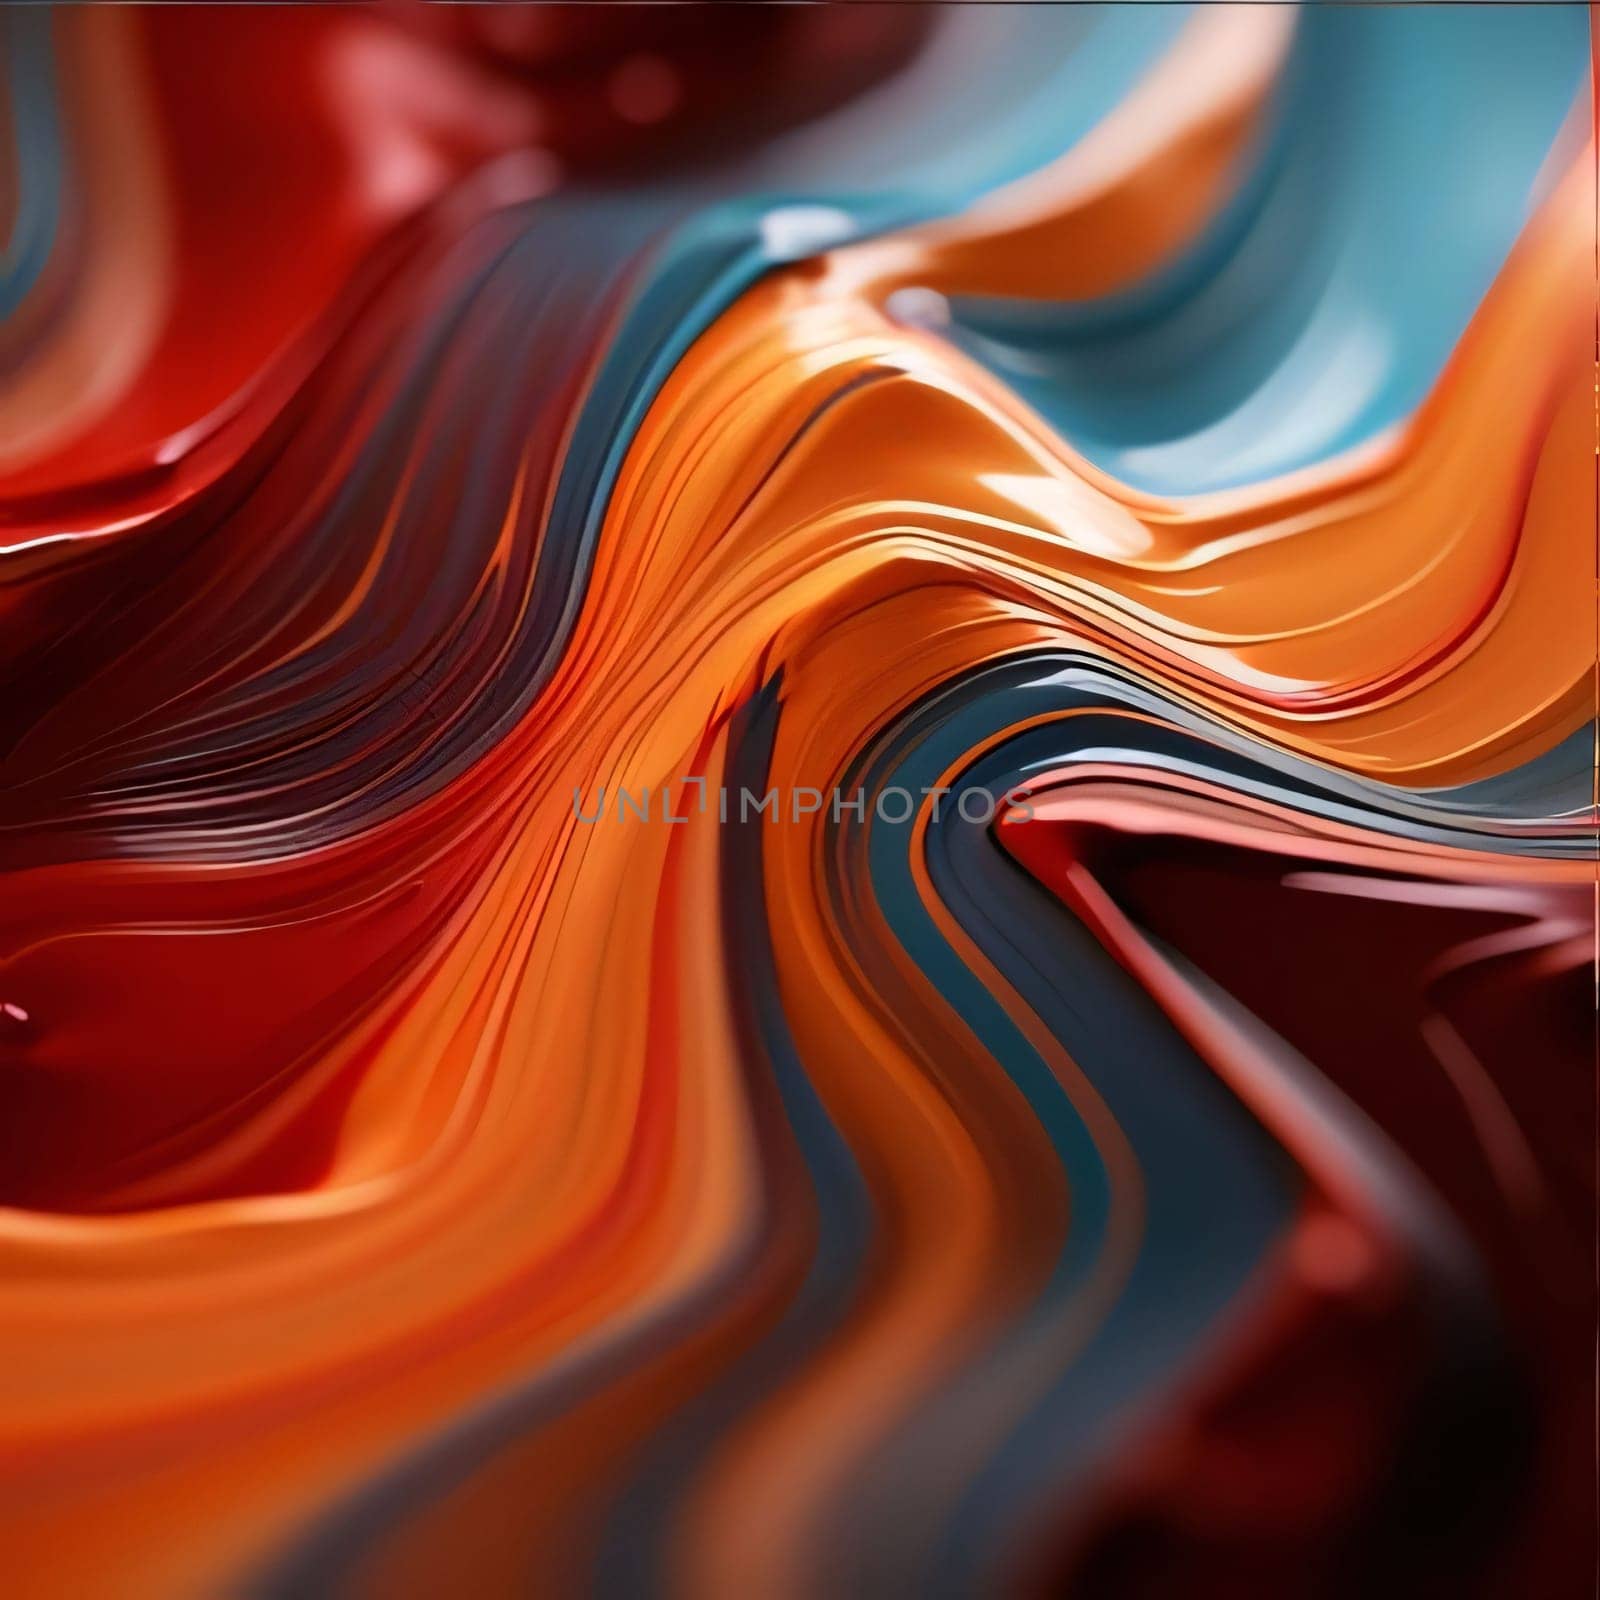 Abstract background design: abstract background with red, orange and black stripes, computer generated images